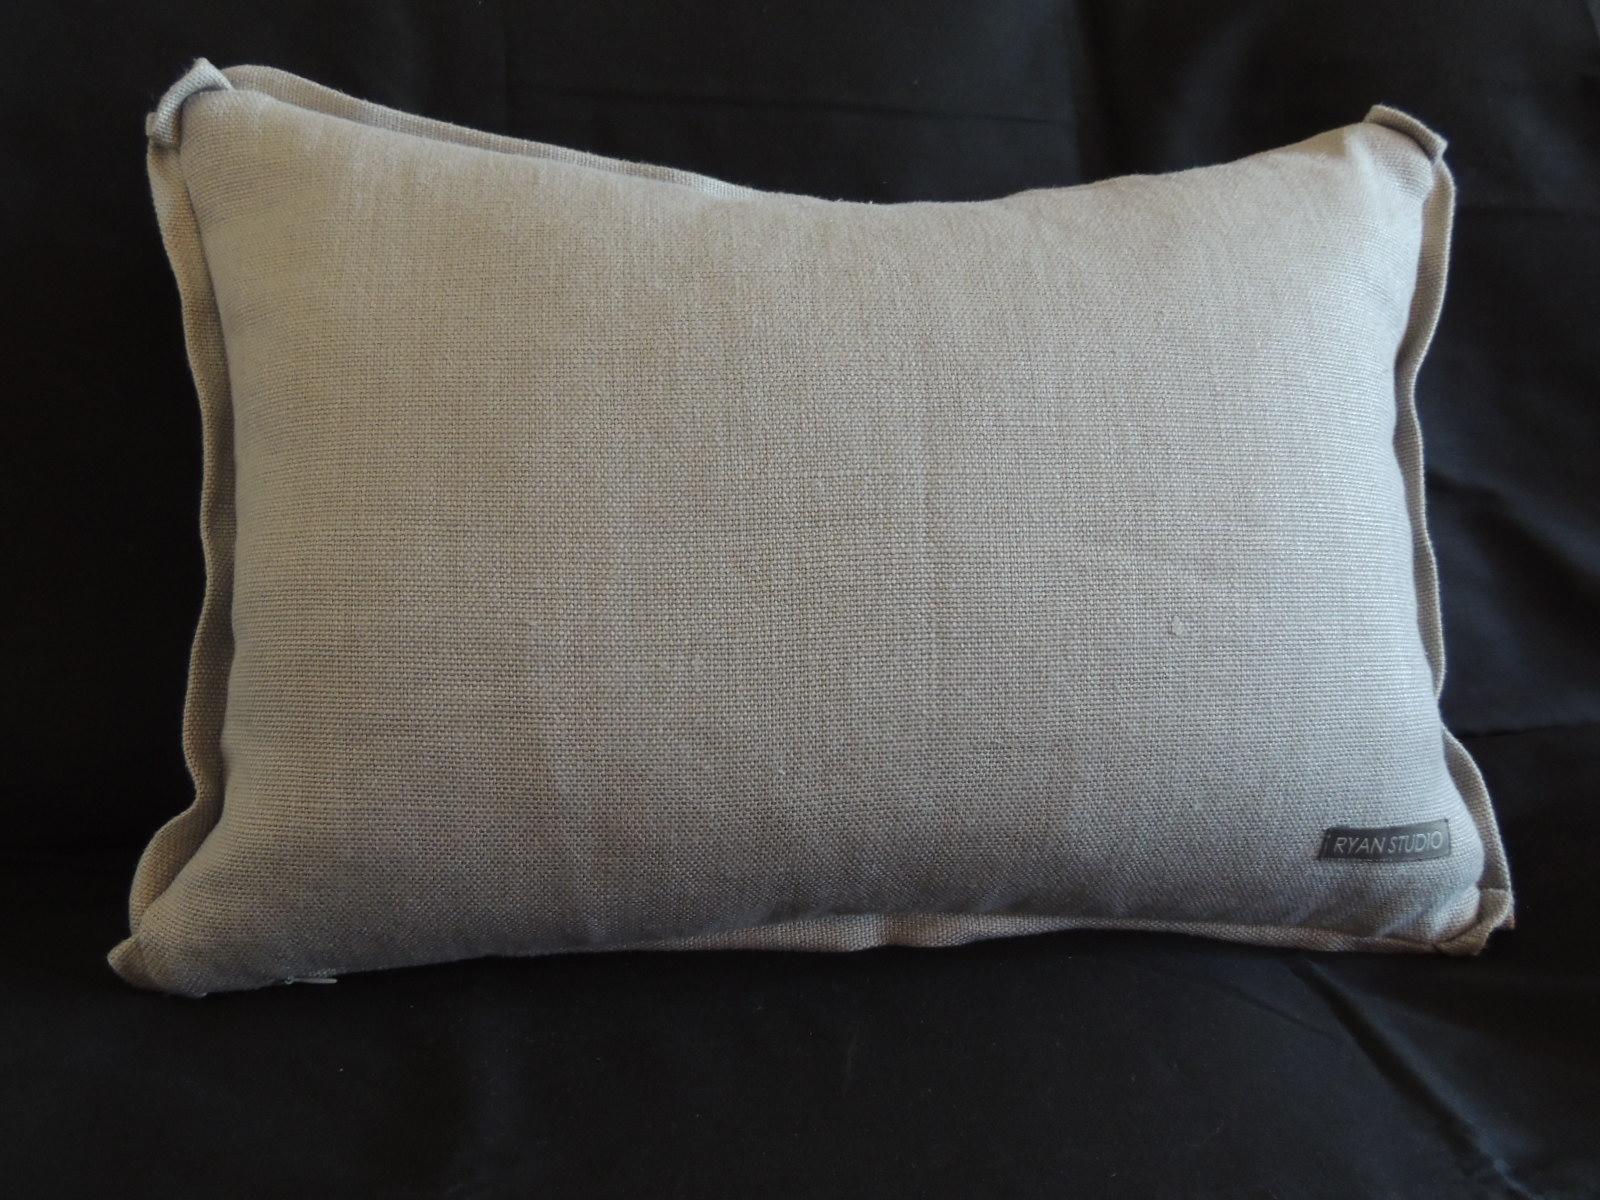 Hollywood Regency Gray and Blue with Greek Key Trim Decorative Linen Bolster Pillow